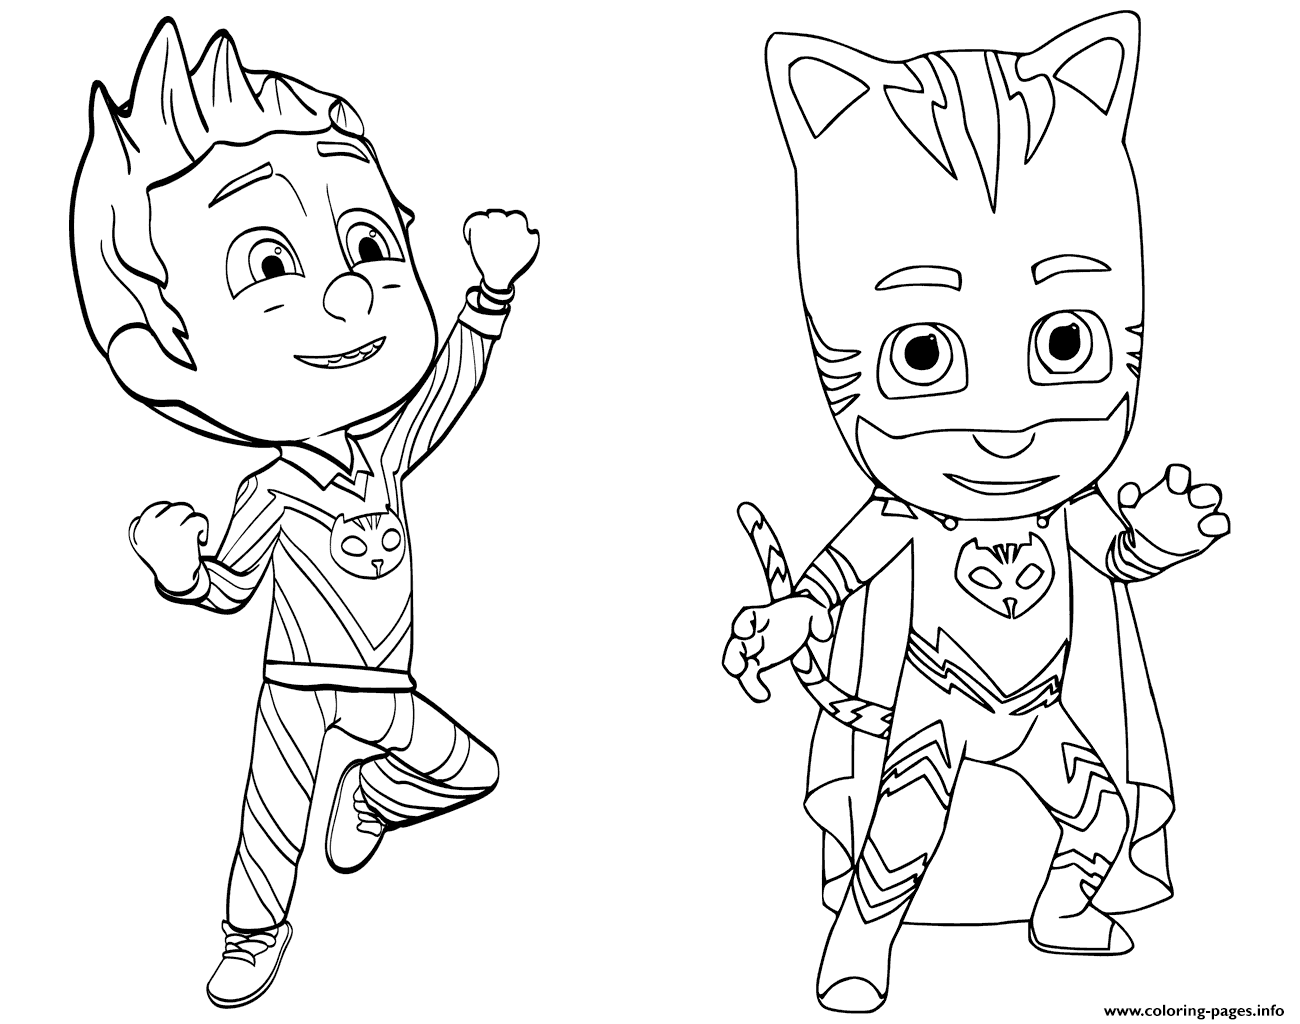 Pajama Hero Connor Is Catboy From PJ Masks Coloring Pages Printable